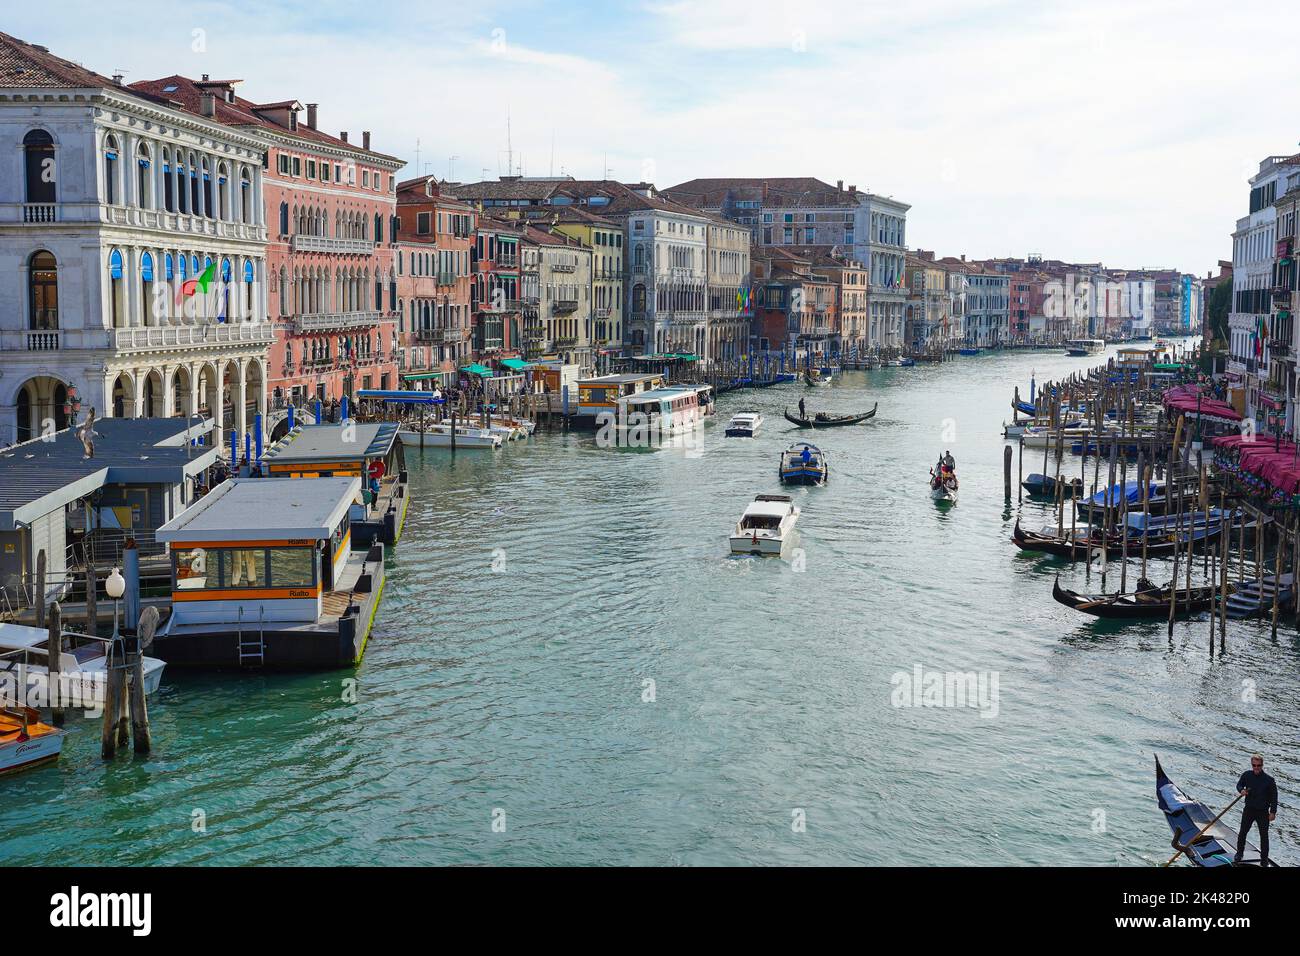 Typical scene in the Grand Canal of Venice, Italy Stock Photo